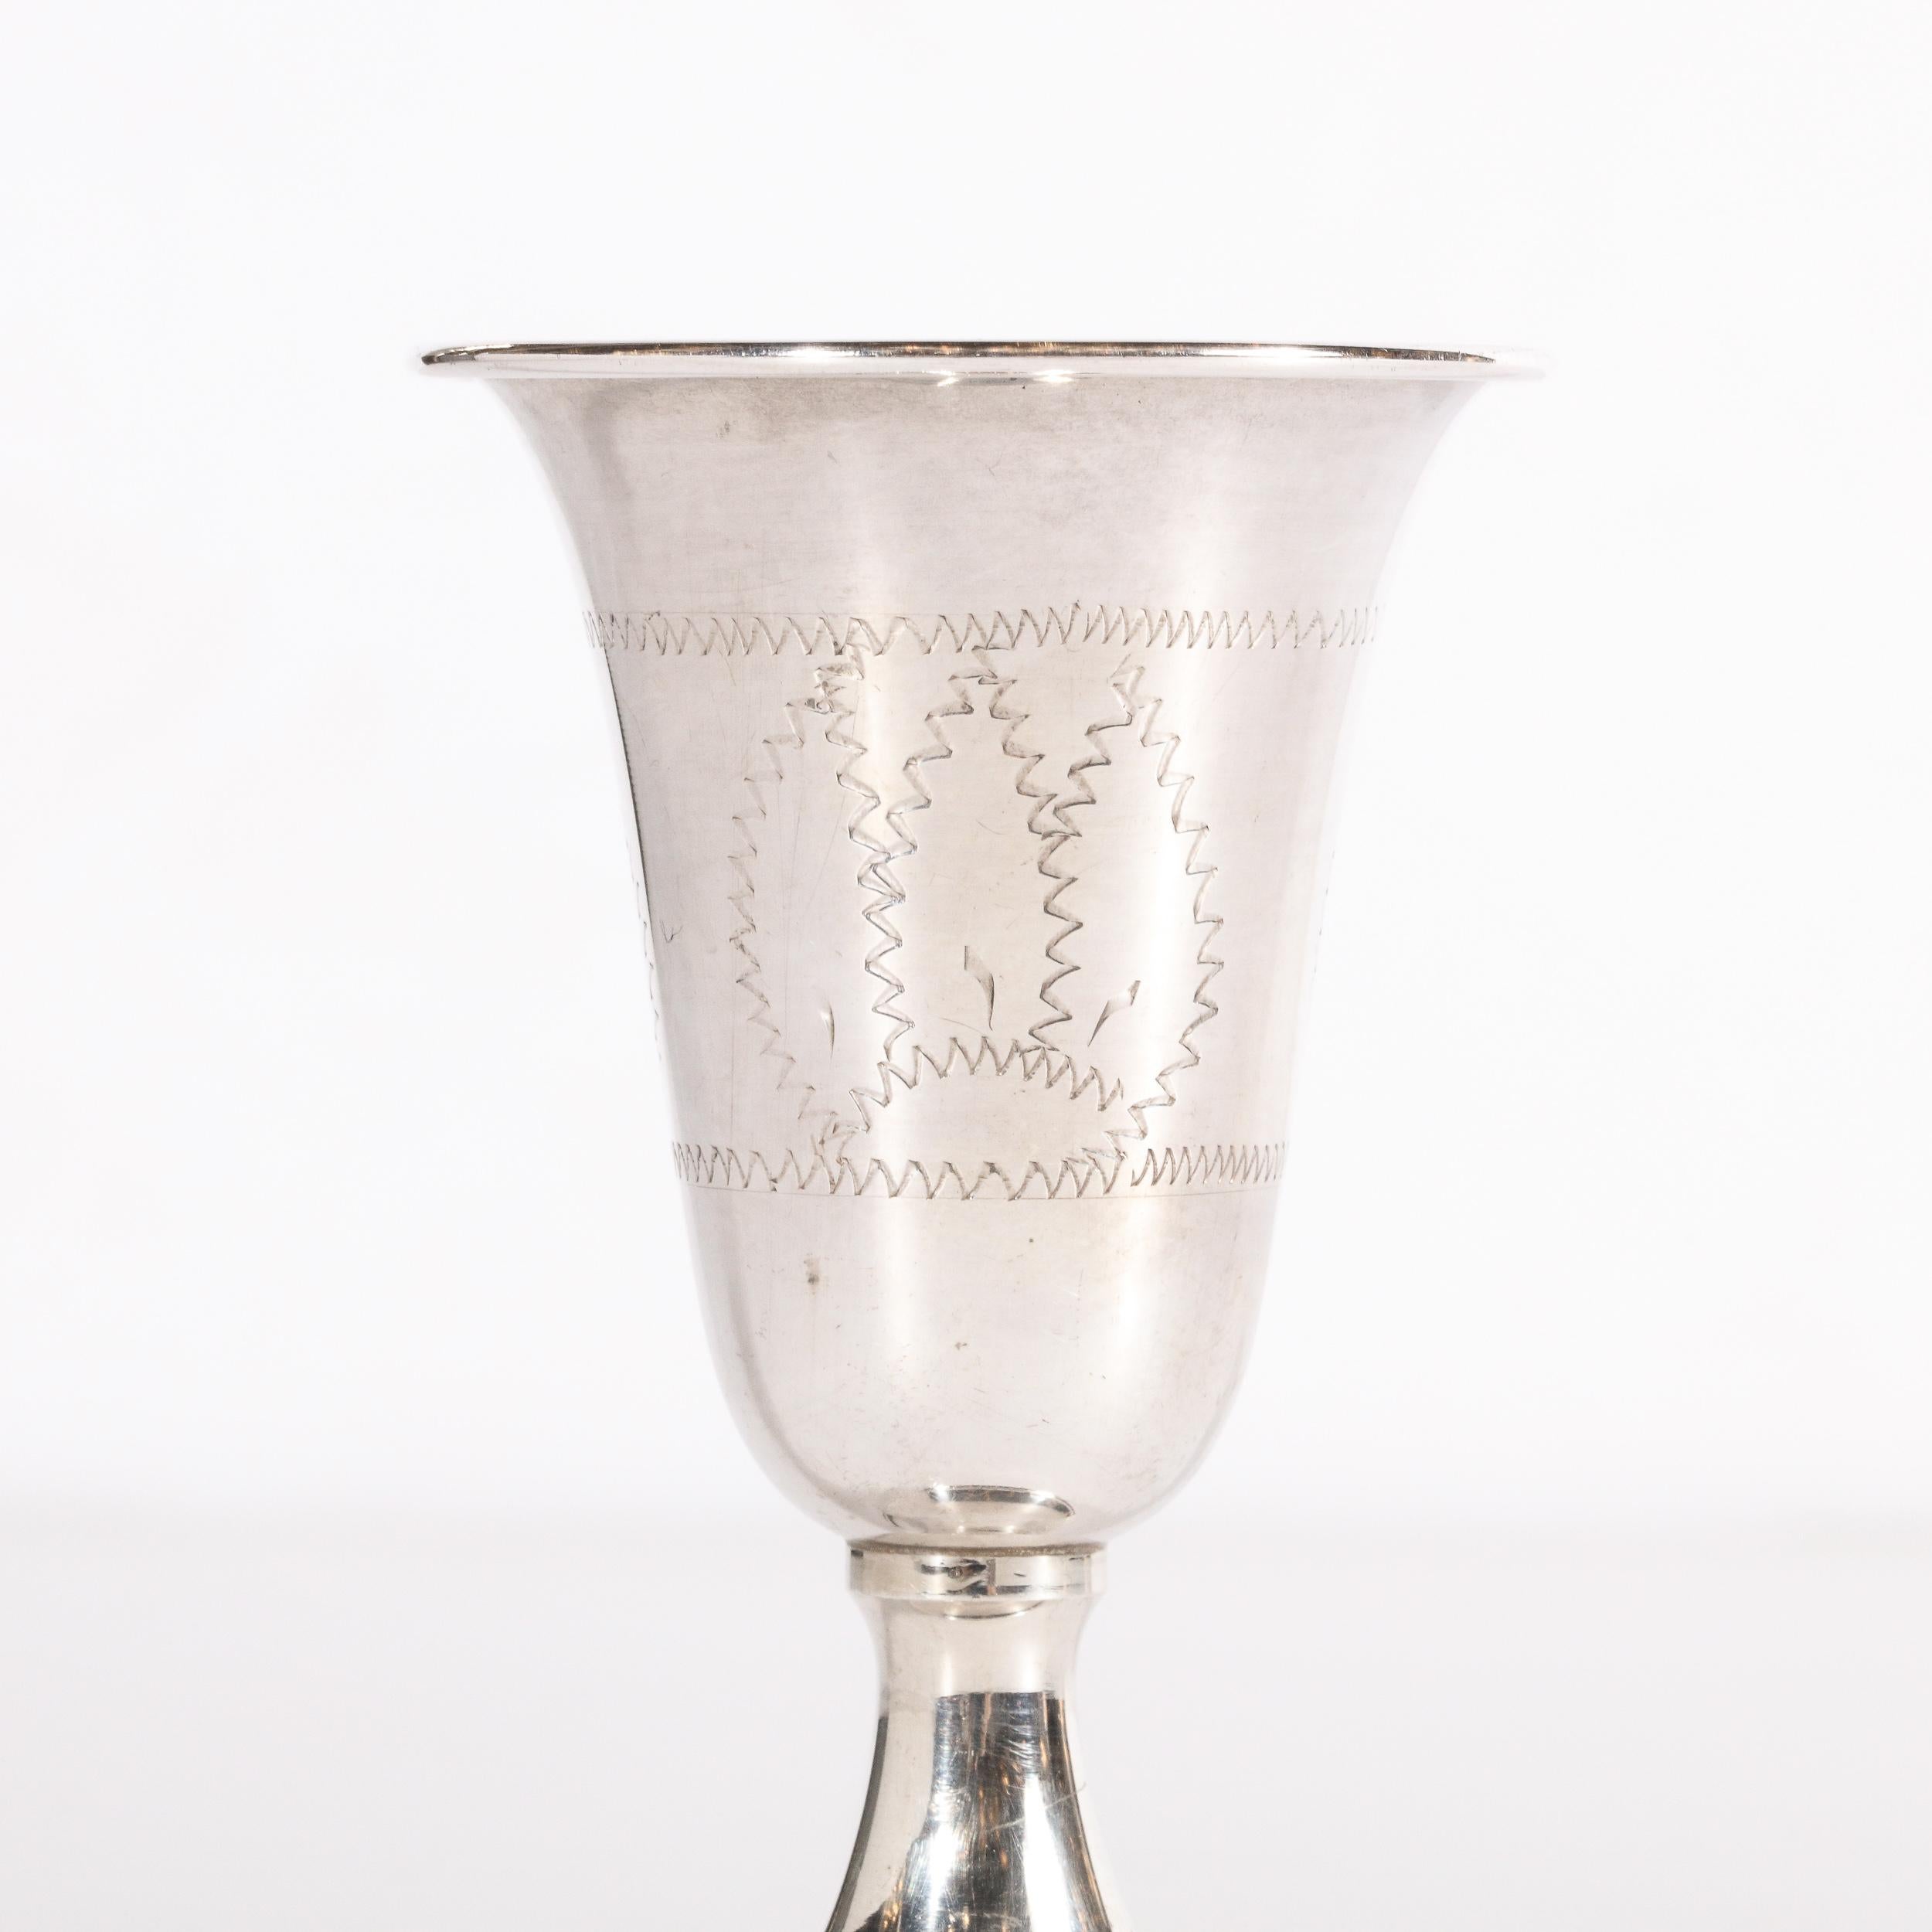 Eastern Sterling Company Sterling Silver Kiddush Goblet Cup & Charger 3